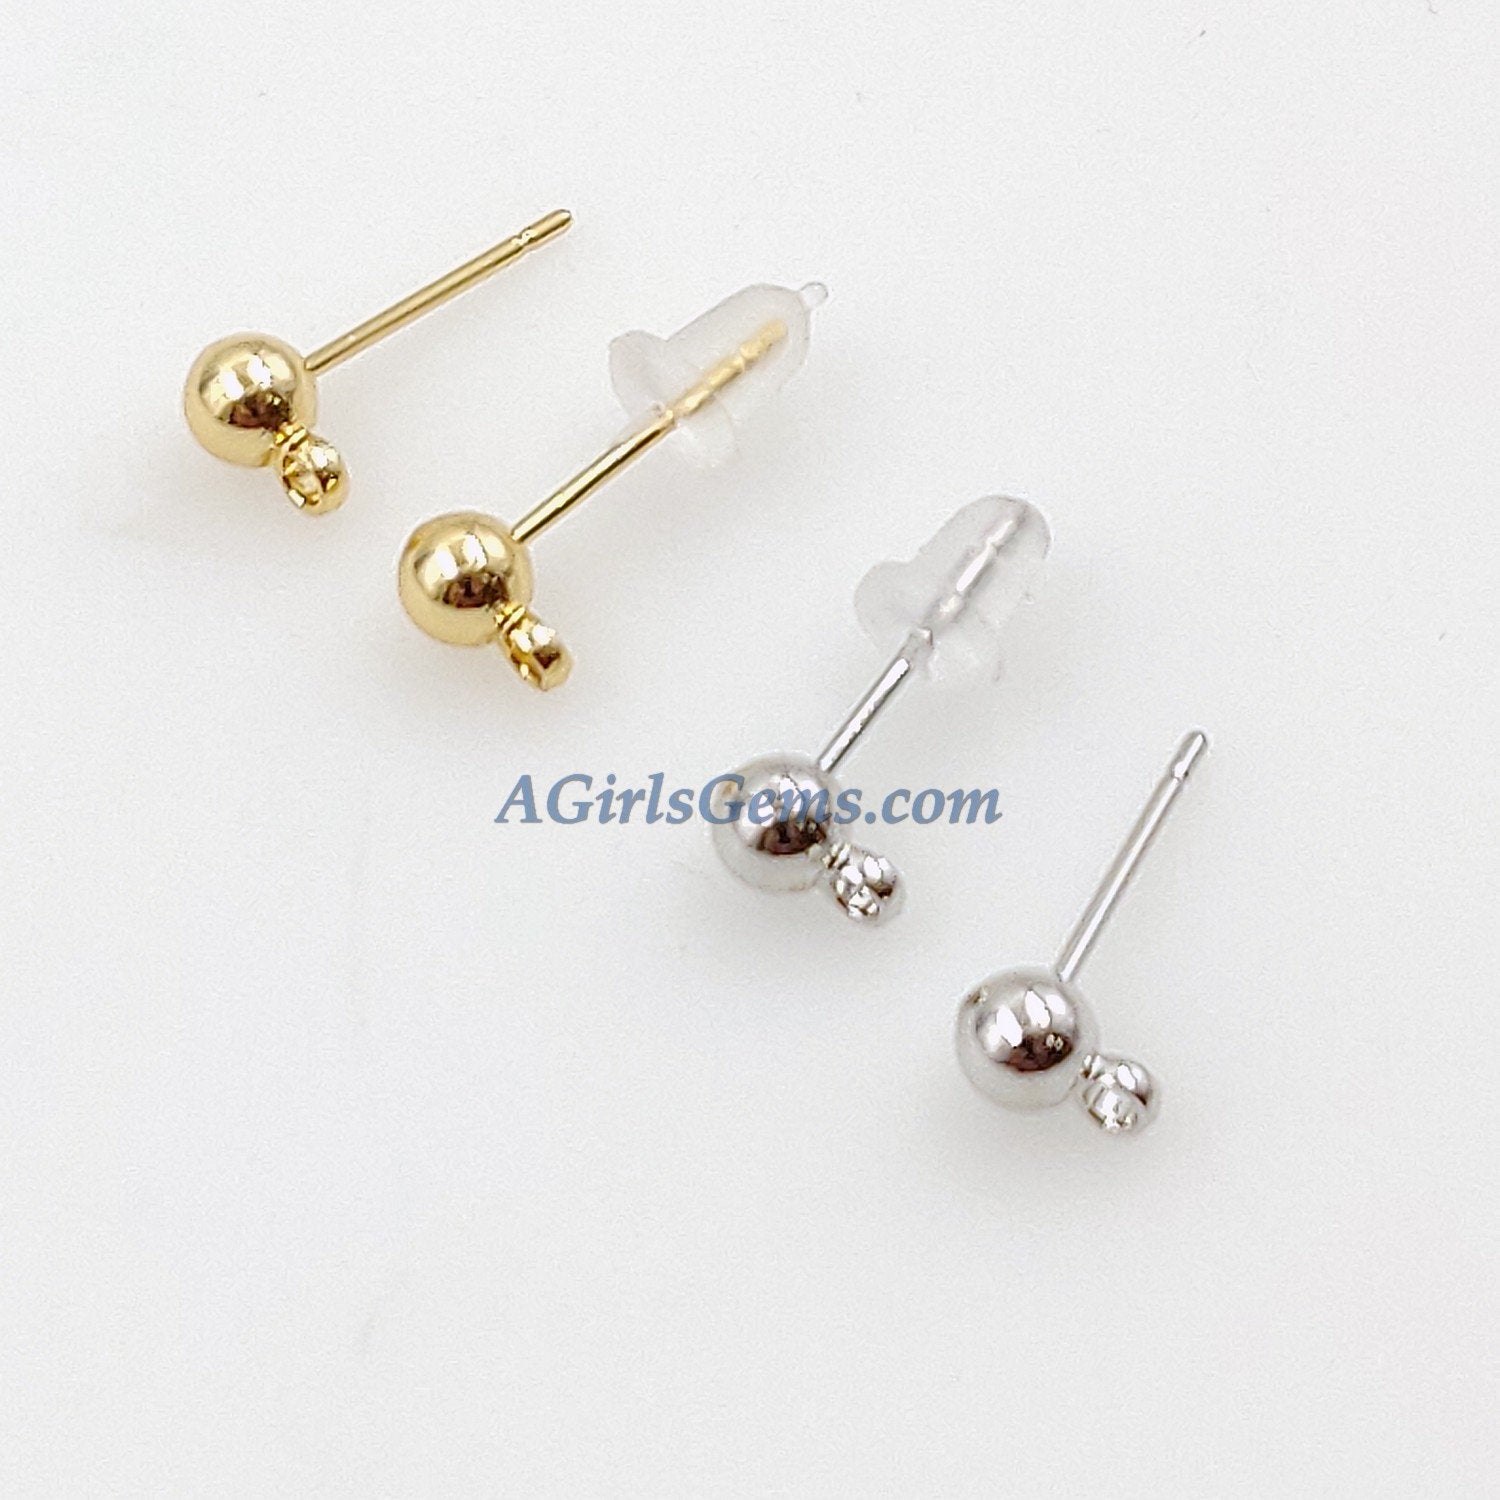 4 mm Round Ball Earrings 20 pcs, Rose, Gold